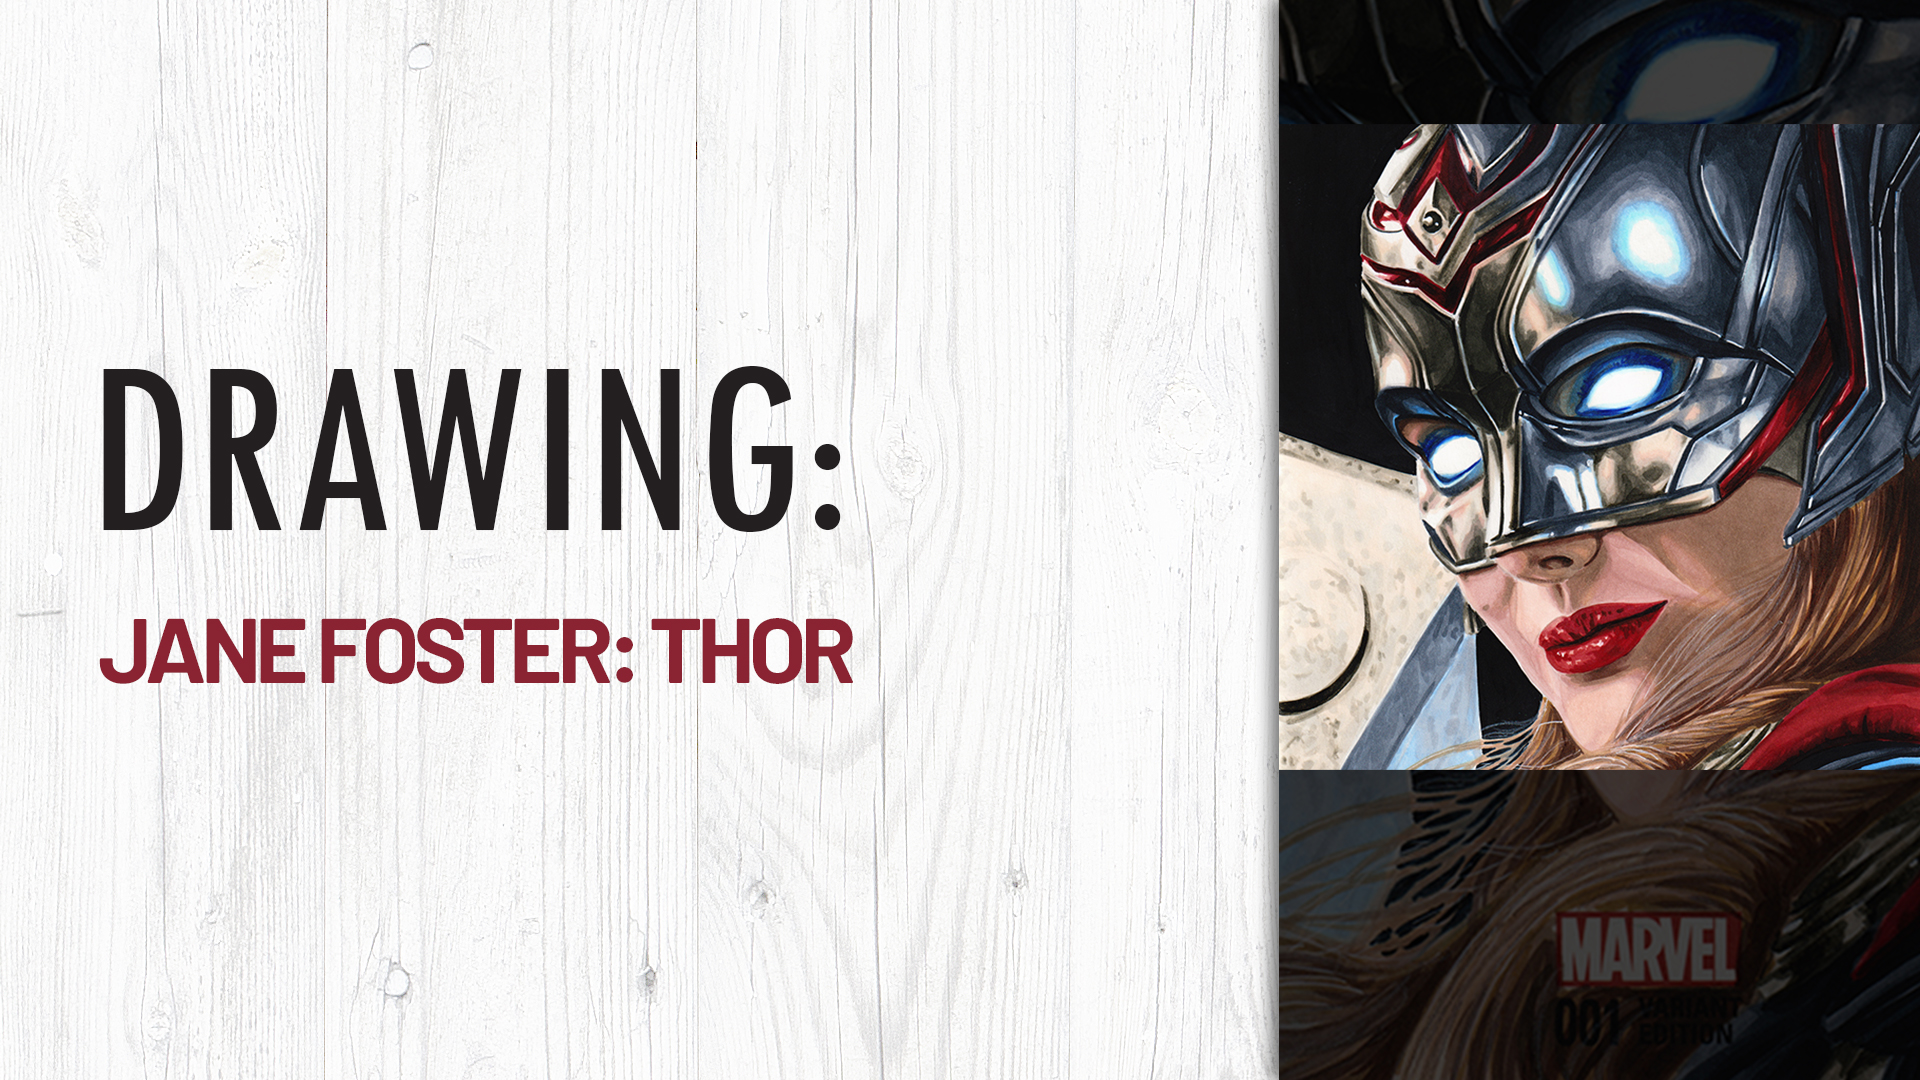 Jane Foster: Thor by Duke